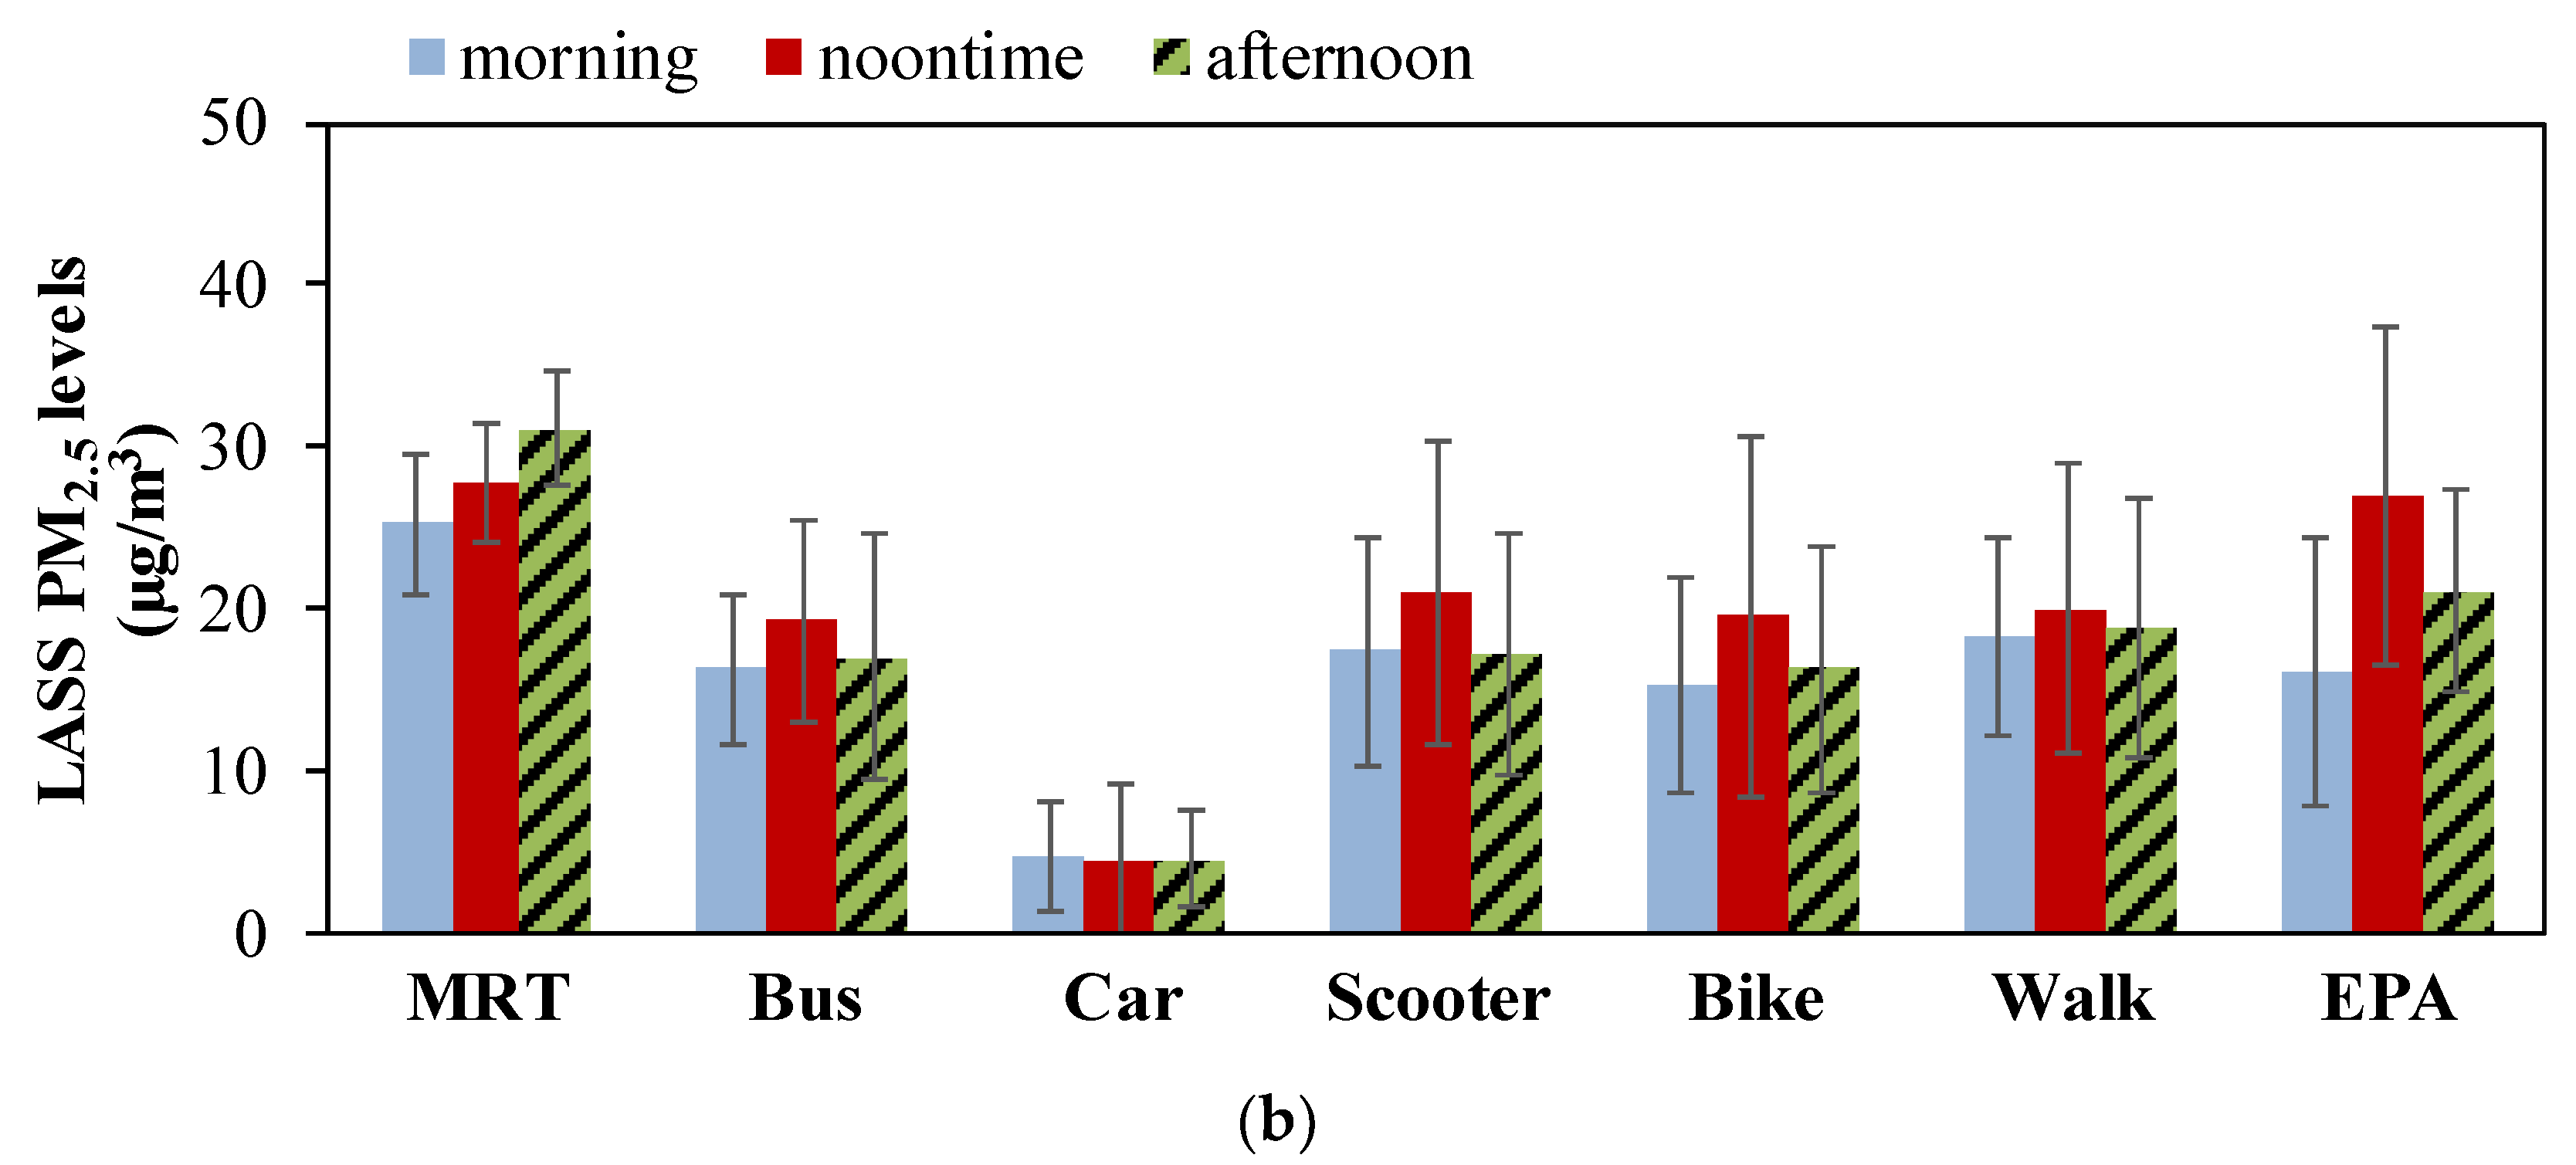 Atmosphere Free Full Text Evaluation And Application Of A Novel Low Cost Wearable Sensing Device In Assessing Real Time Pm2 5 Exposure In Major Asian Transportation Modes Html